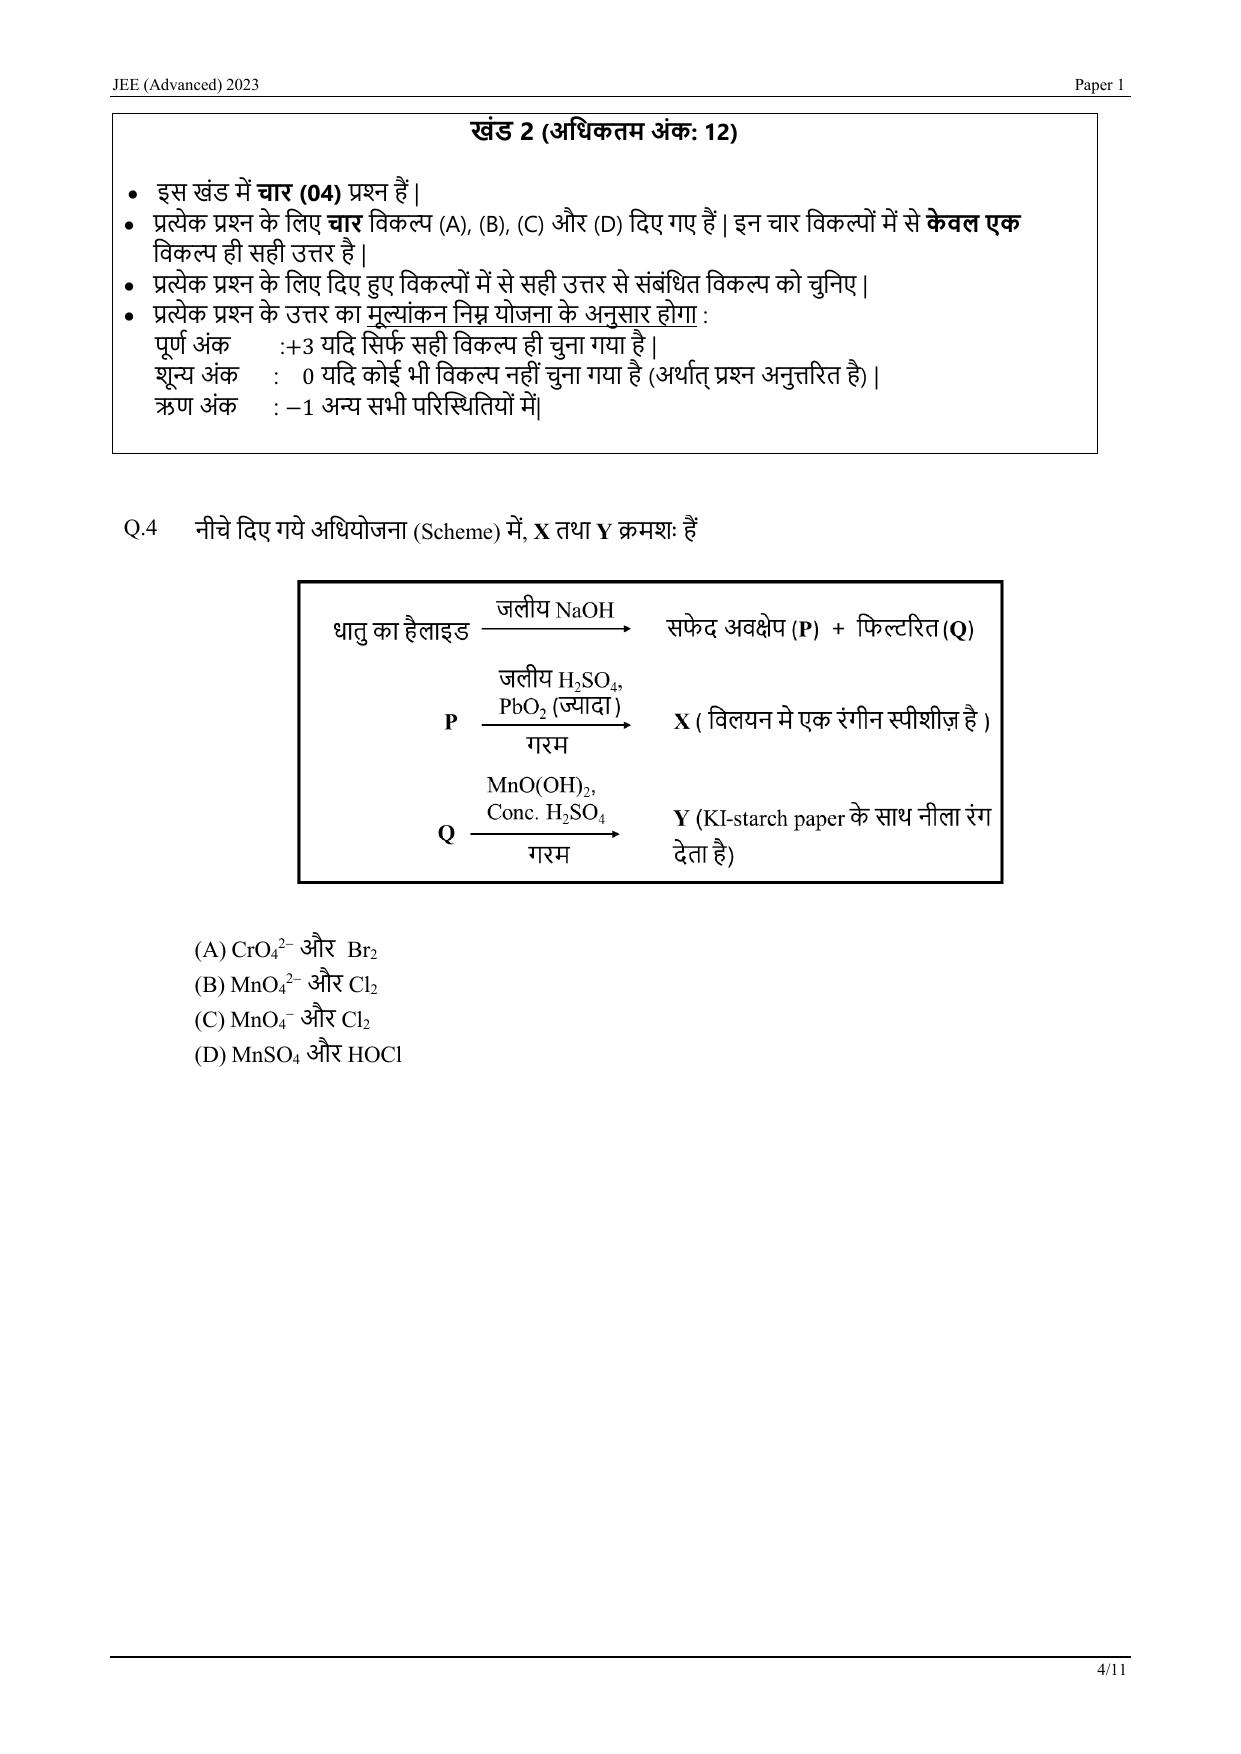 JEE Advanced 2023 Question Paper 1 (Hindi) - Page 24